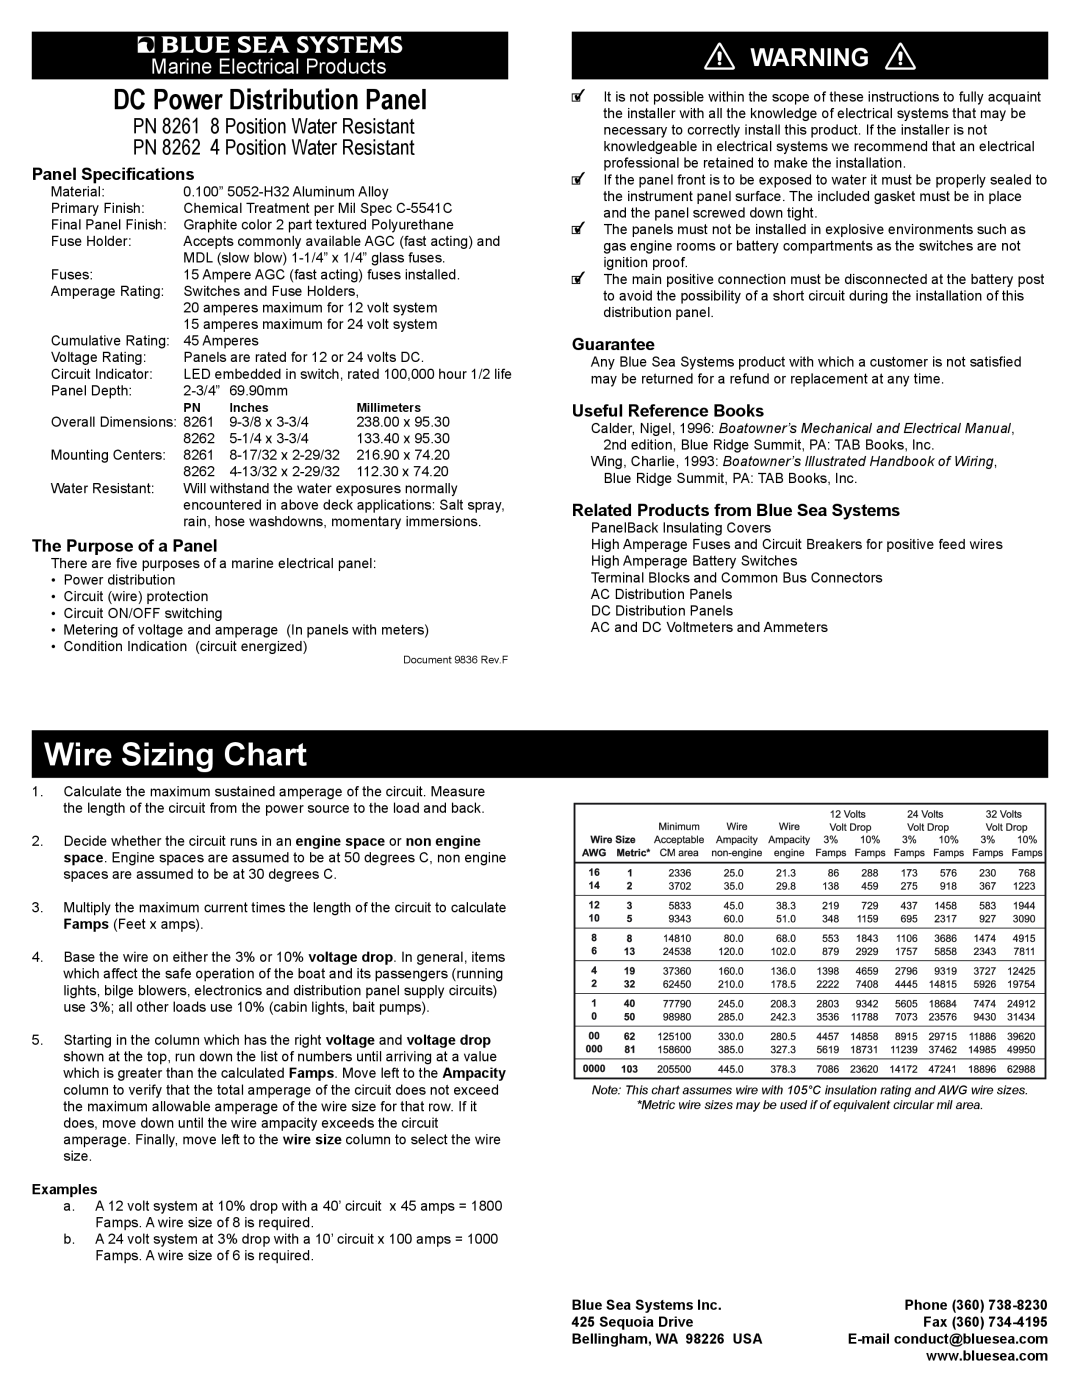 Blue Sea Systems PN 8261 specifications Wire Sizing Chart, DC Power Distribution Panel, Marine Electrical Products, Phone 